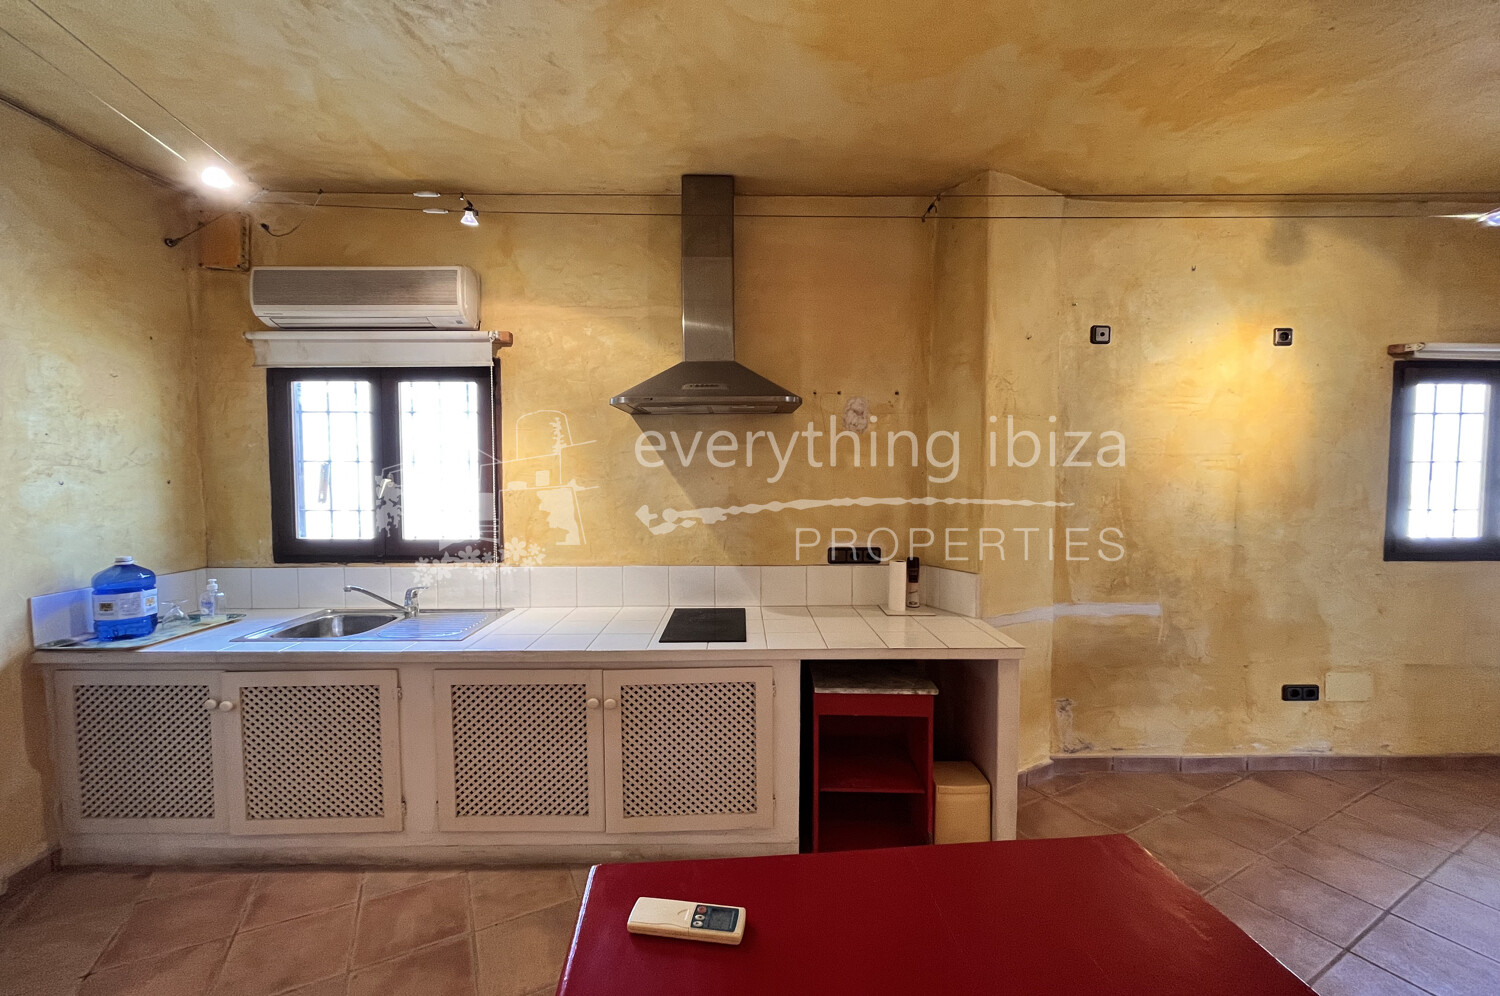 https://www.everythingibiza.com/properties/versatile-commer…of-san-jose-1640/,ref. 8, for sale in Ibiza by everything ibiza Properties